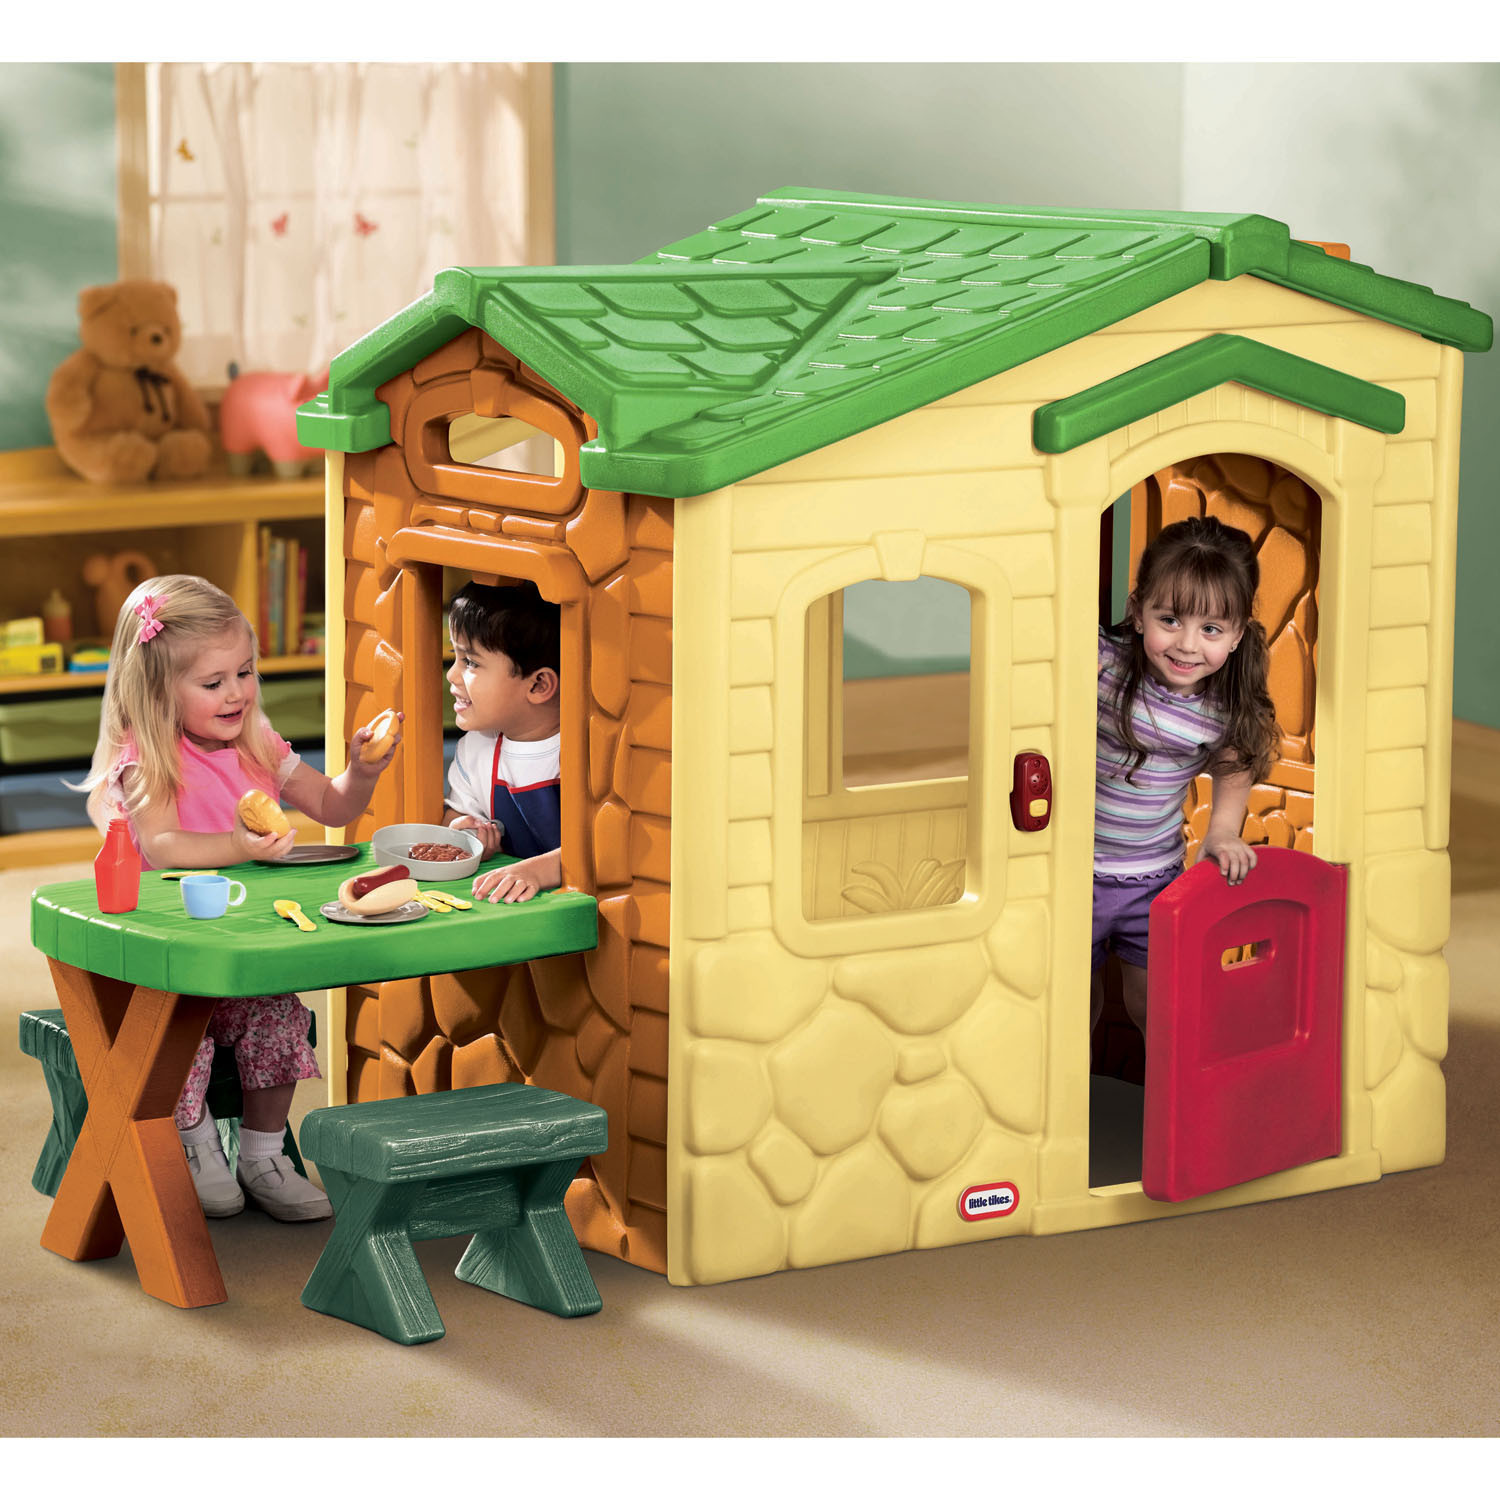 Best ideas about Little Tikes Picnic On The Patio Playhouse
. Save or Pin Little Tikes Picnic on The Patio Playhouse in Natural Now.